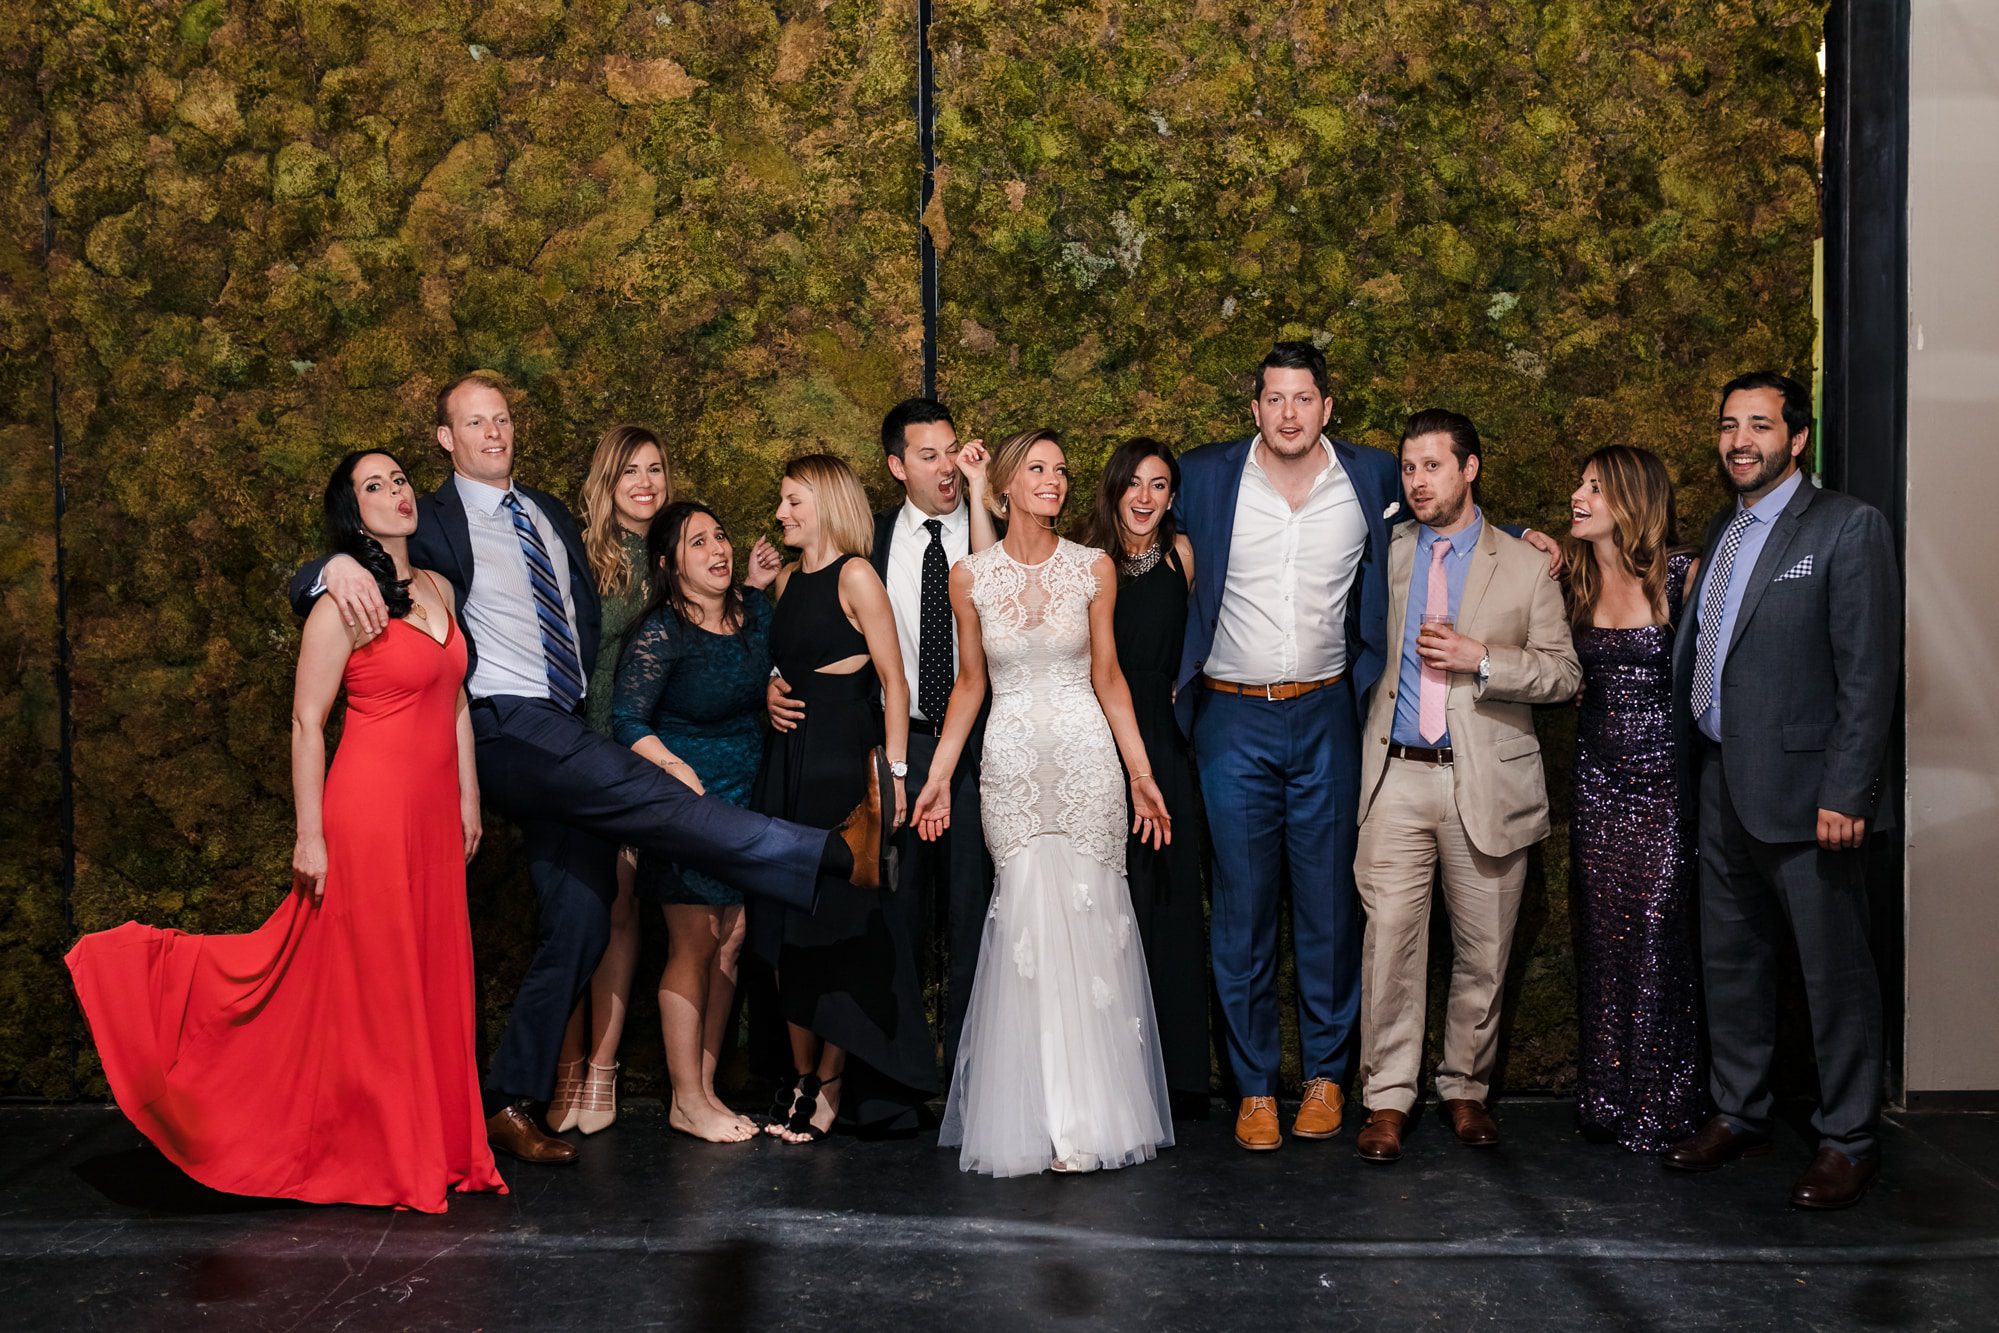 funny photos at weddings, funny group photos at weddings, bride with friends funny photo